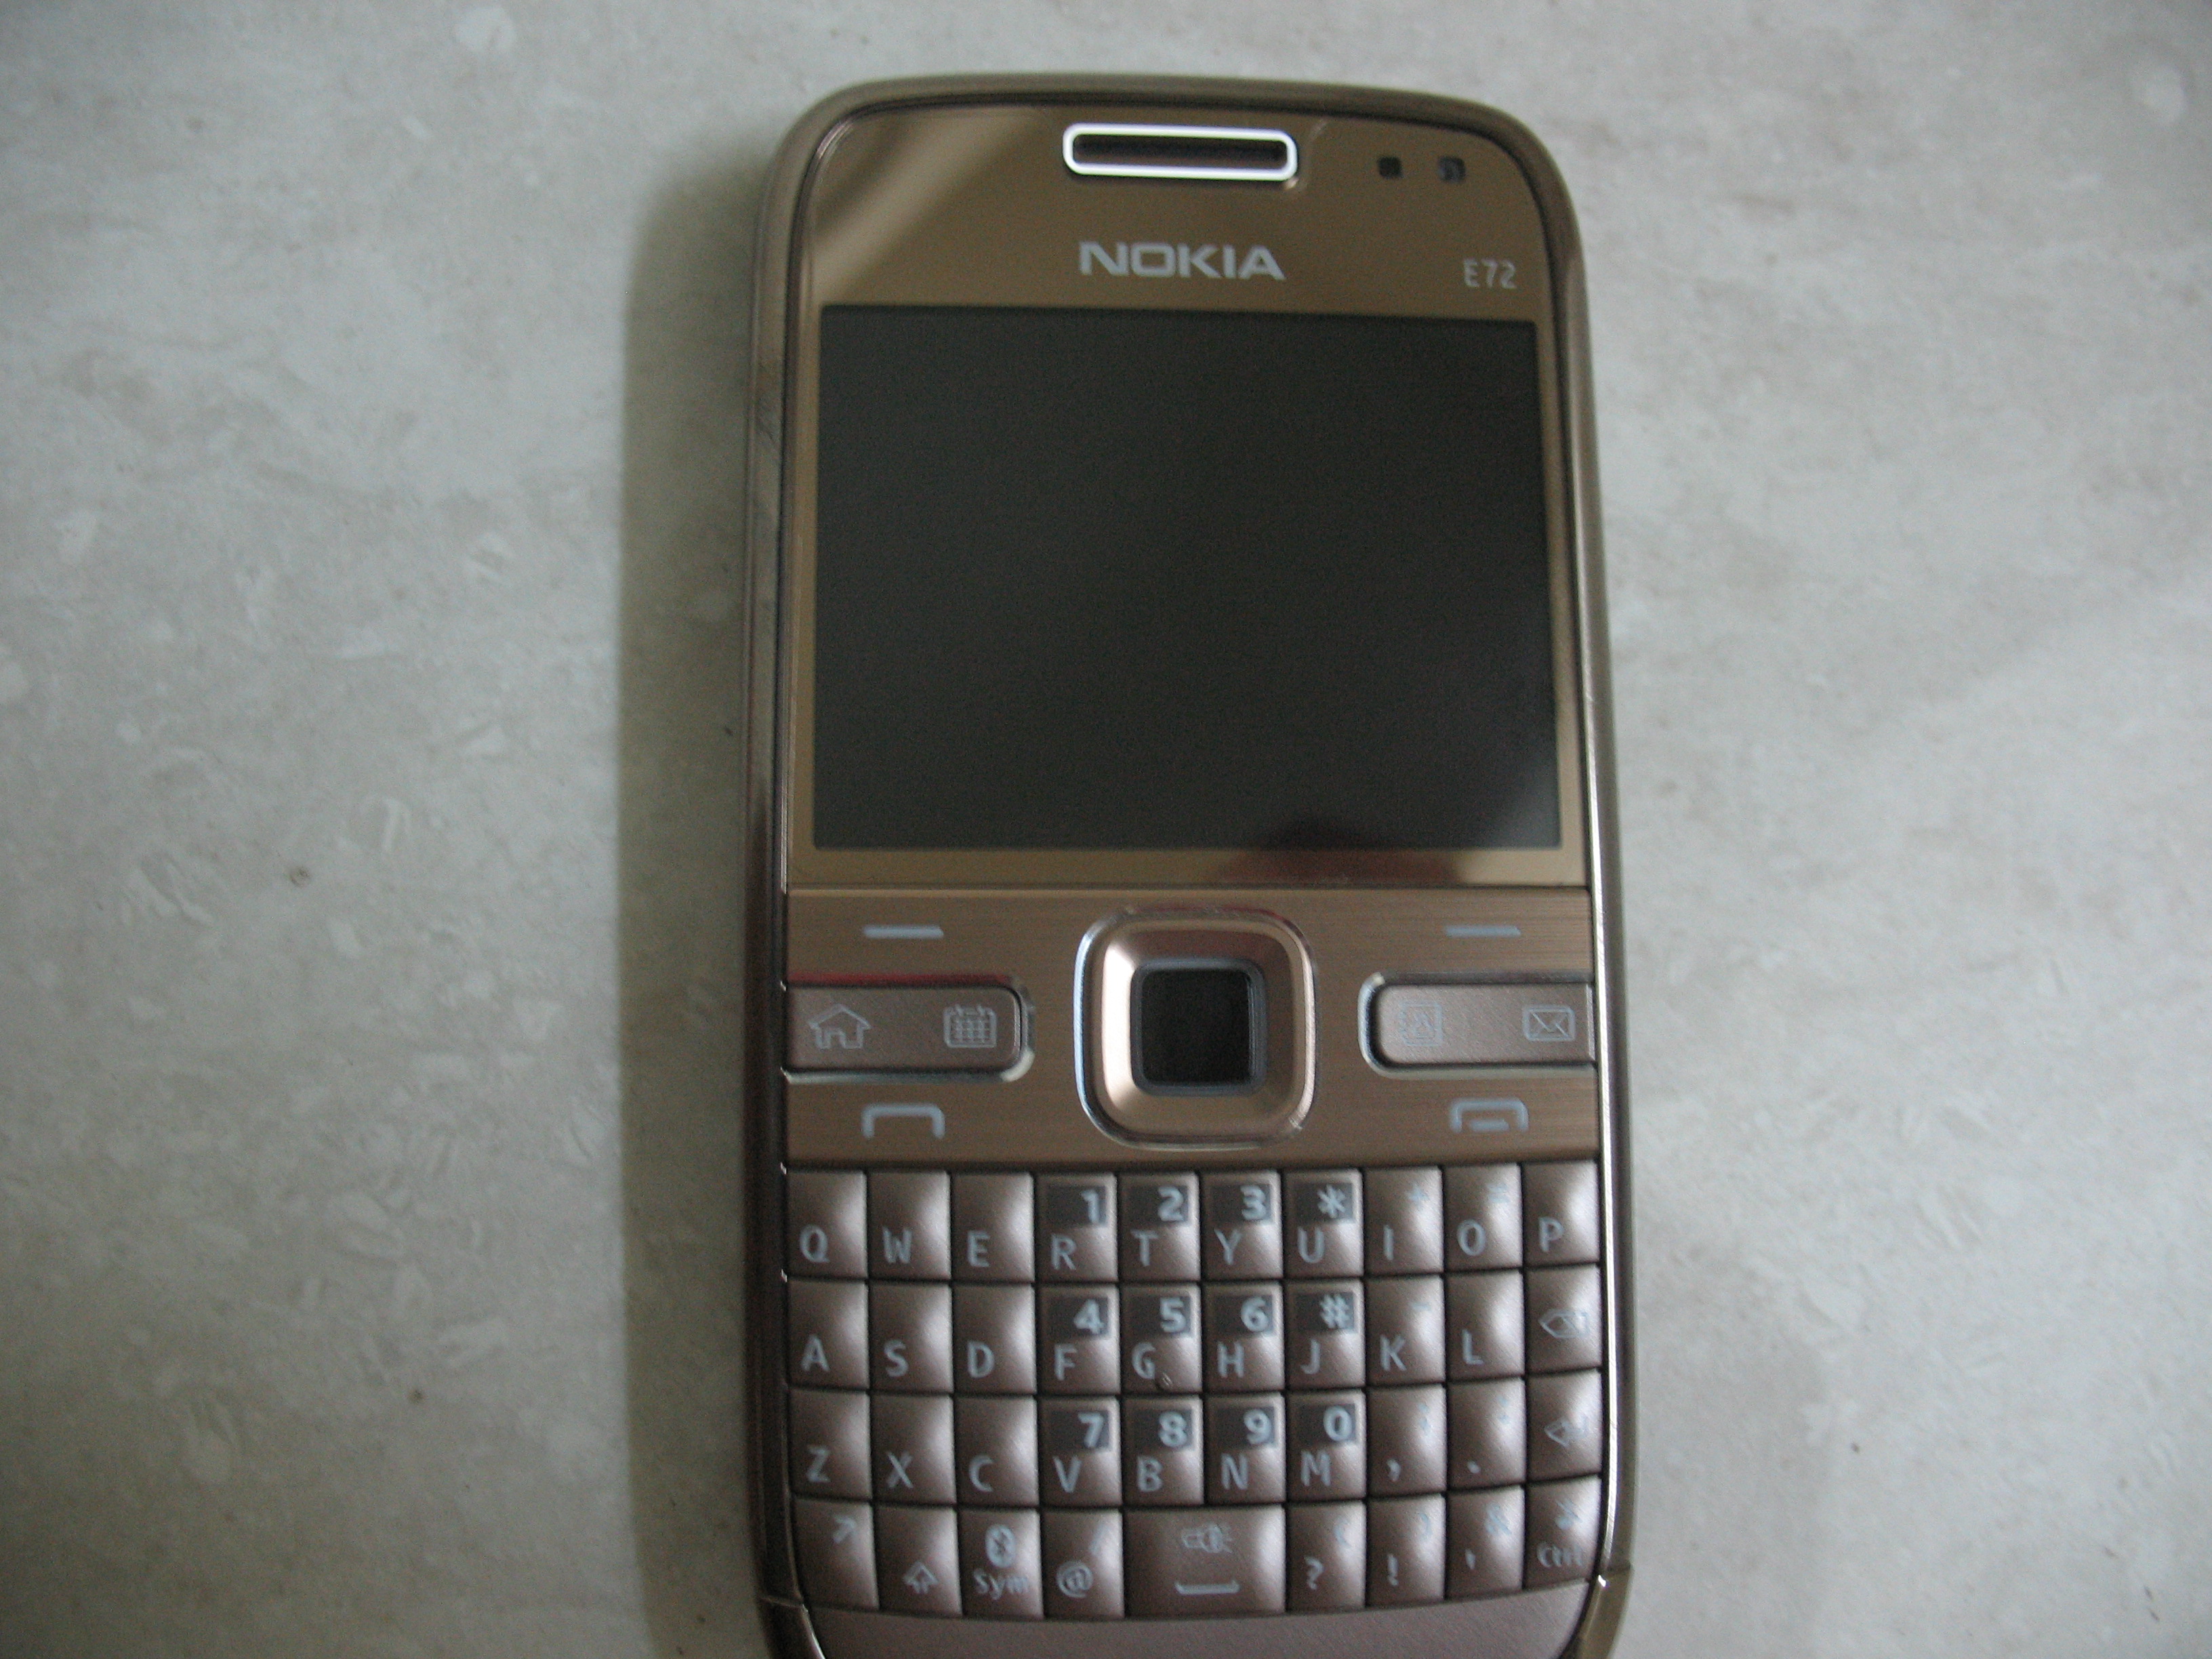 Nokia e72 browser unable to connect to website